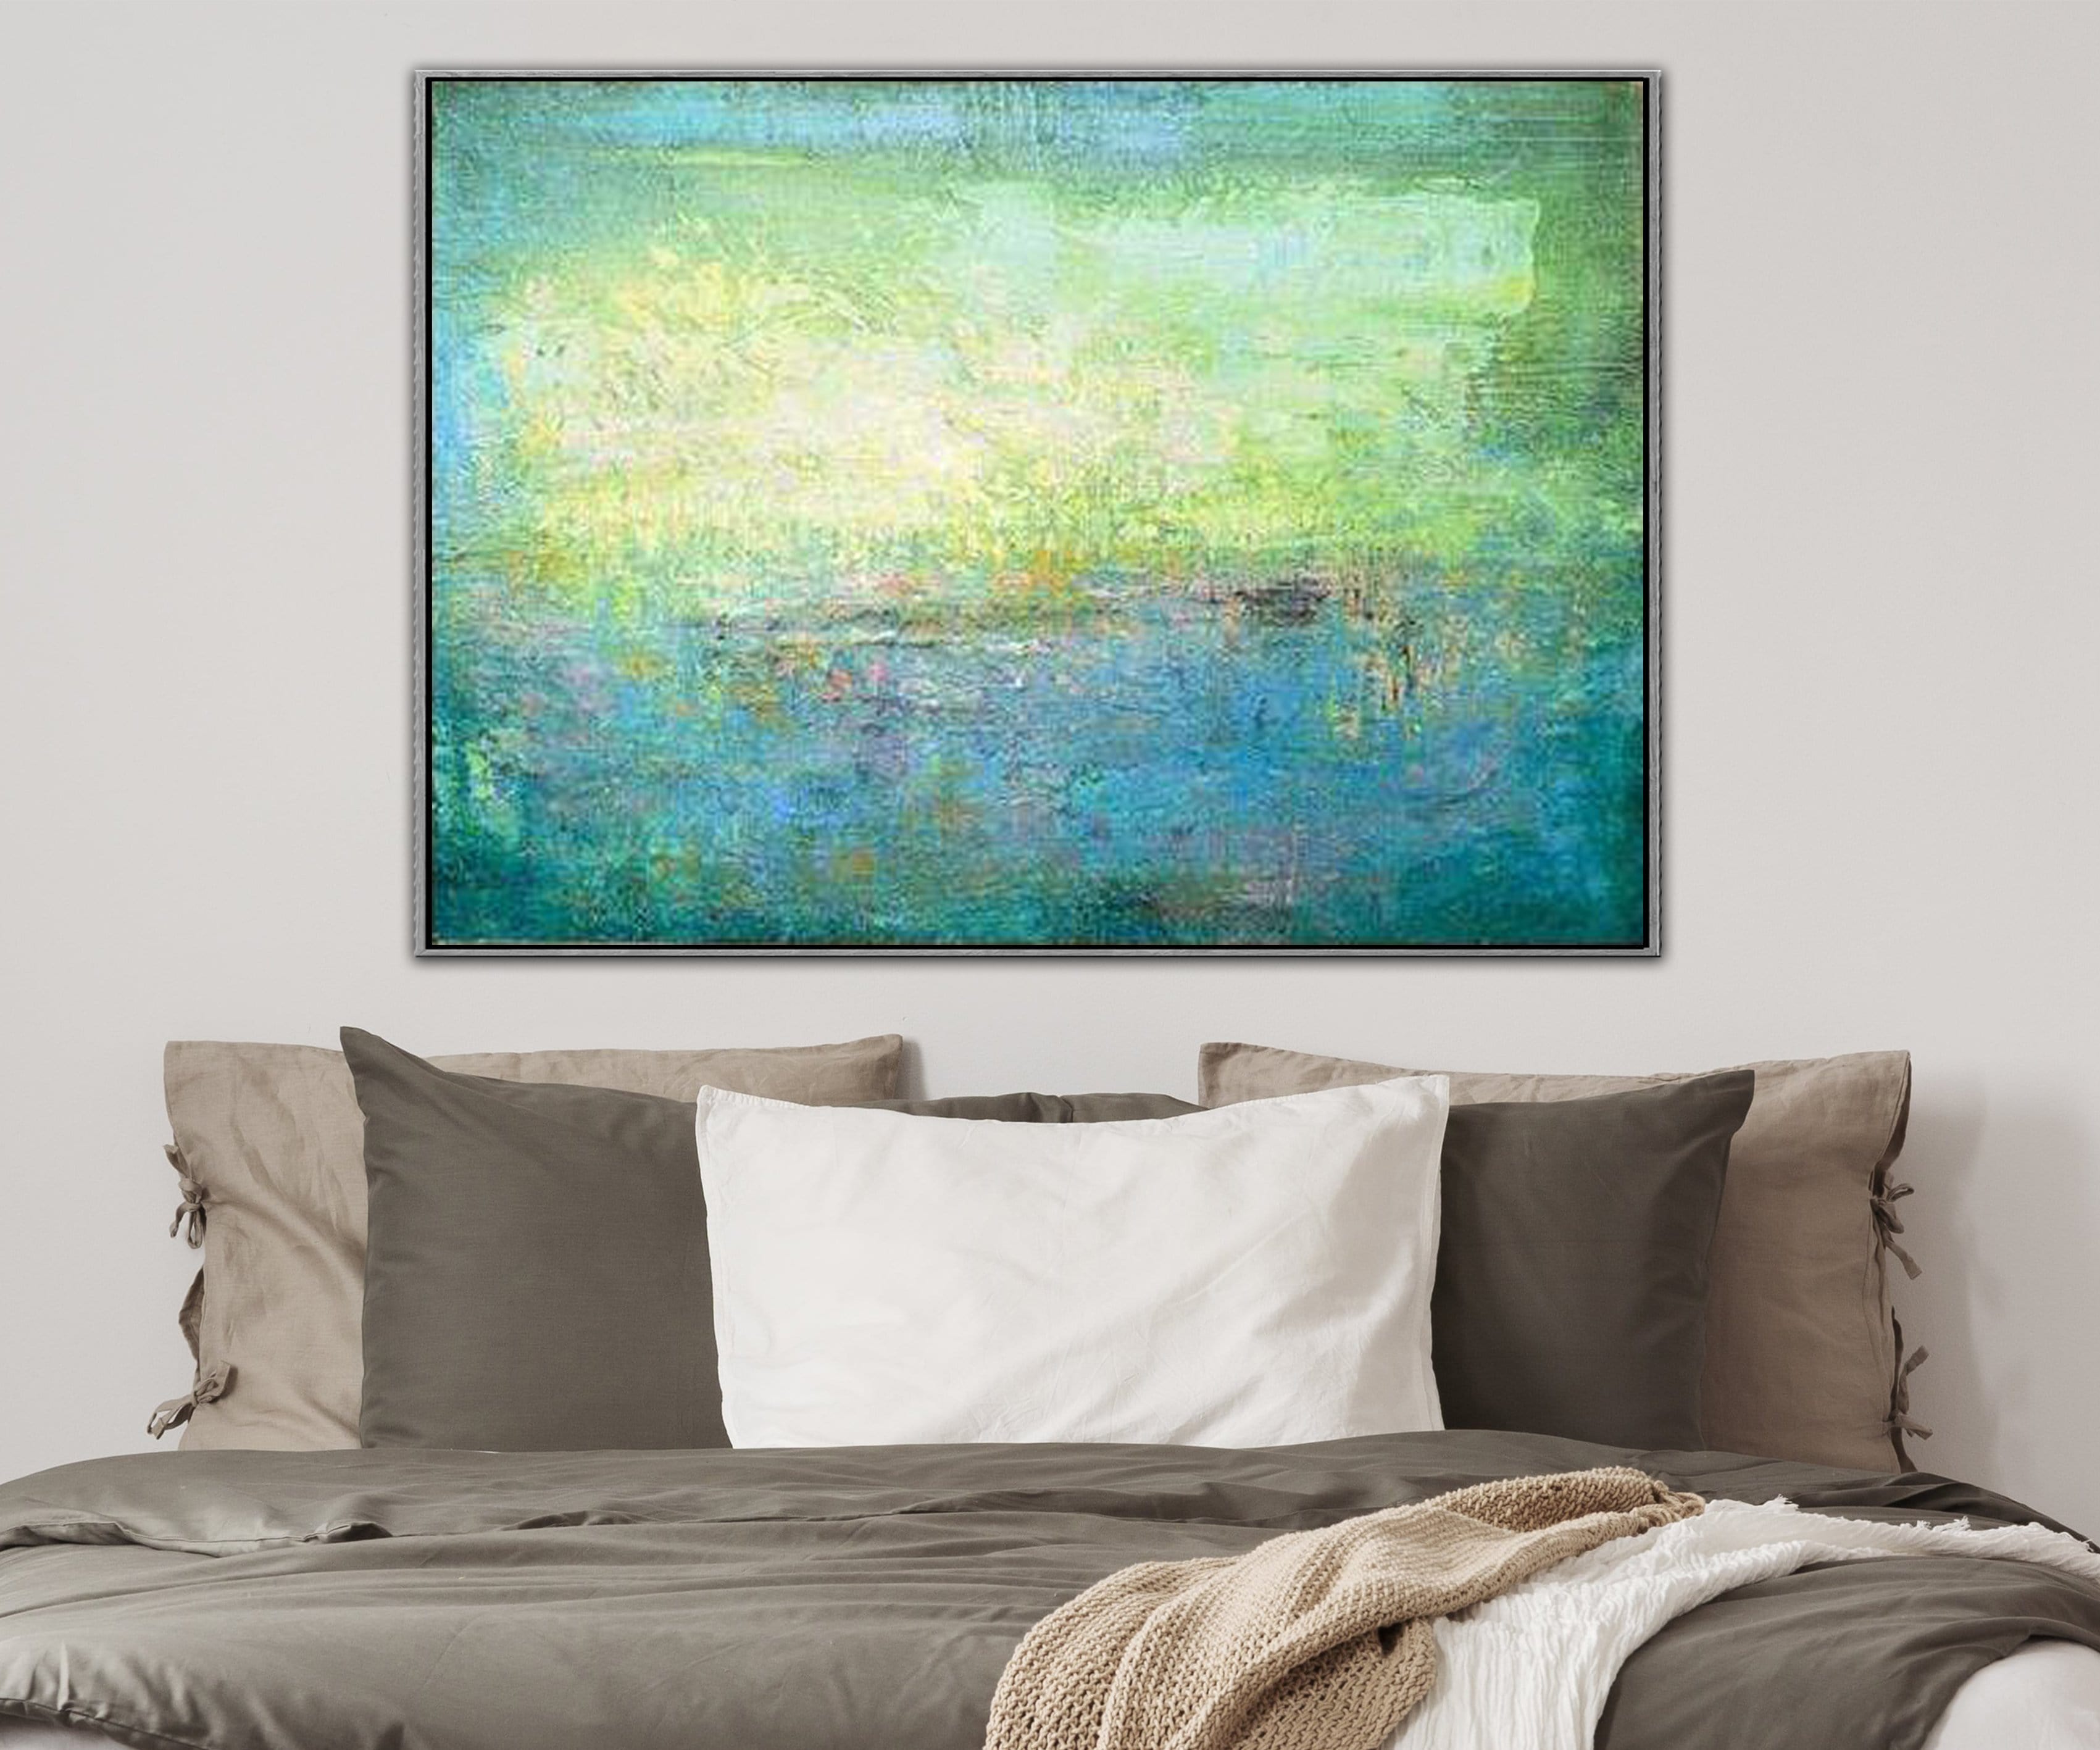 TURQUOISE MEADOW FROM $340